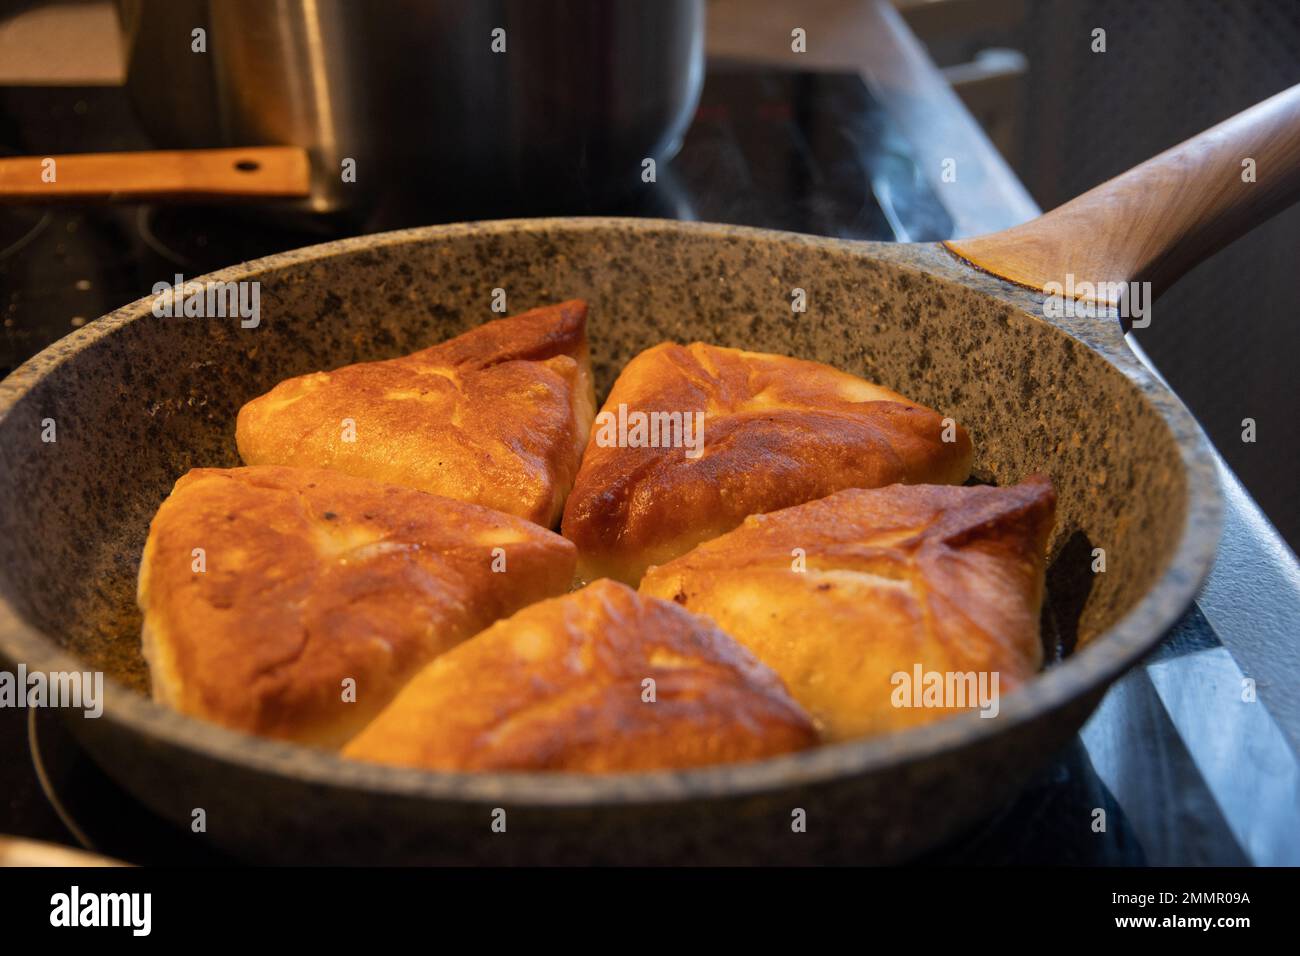 Fry delicious homemade lush pies with meat filling in hot vegetable oil. Pies are fried in a pan. Russian cuisine. Stock Photo